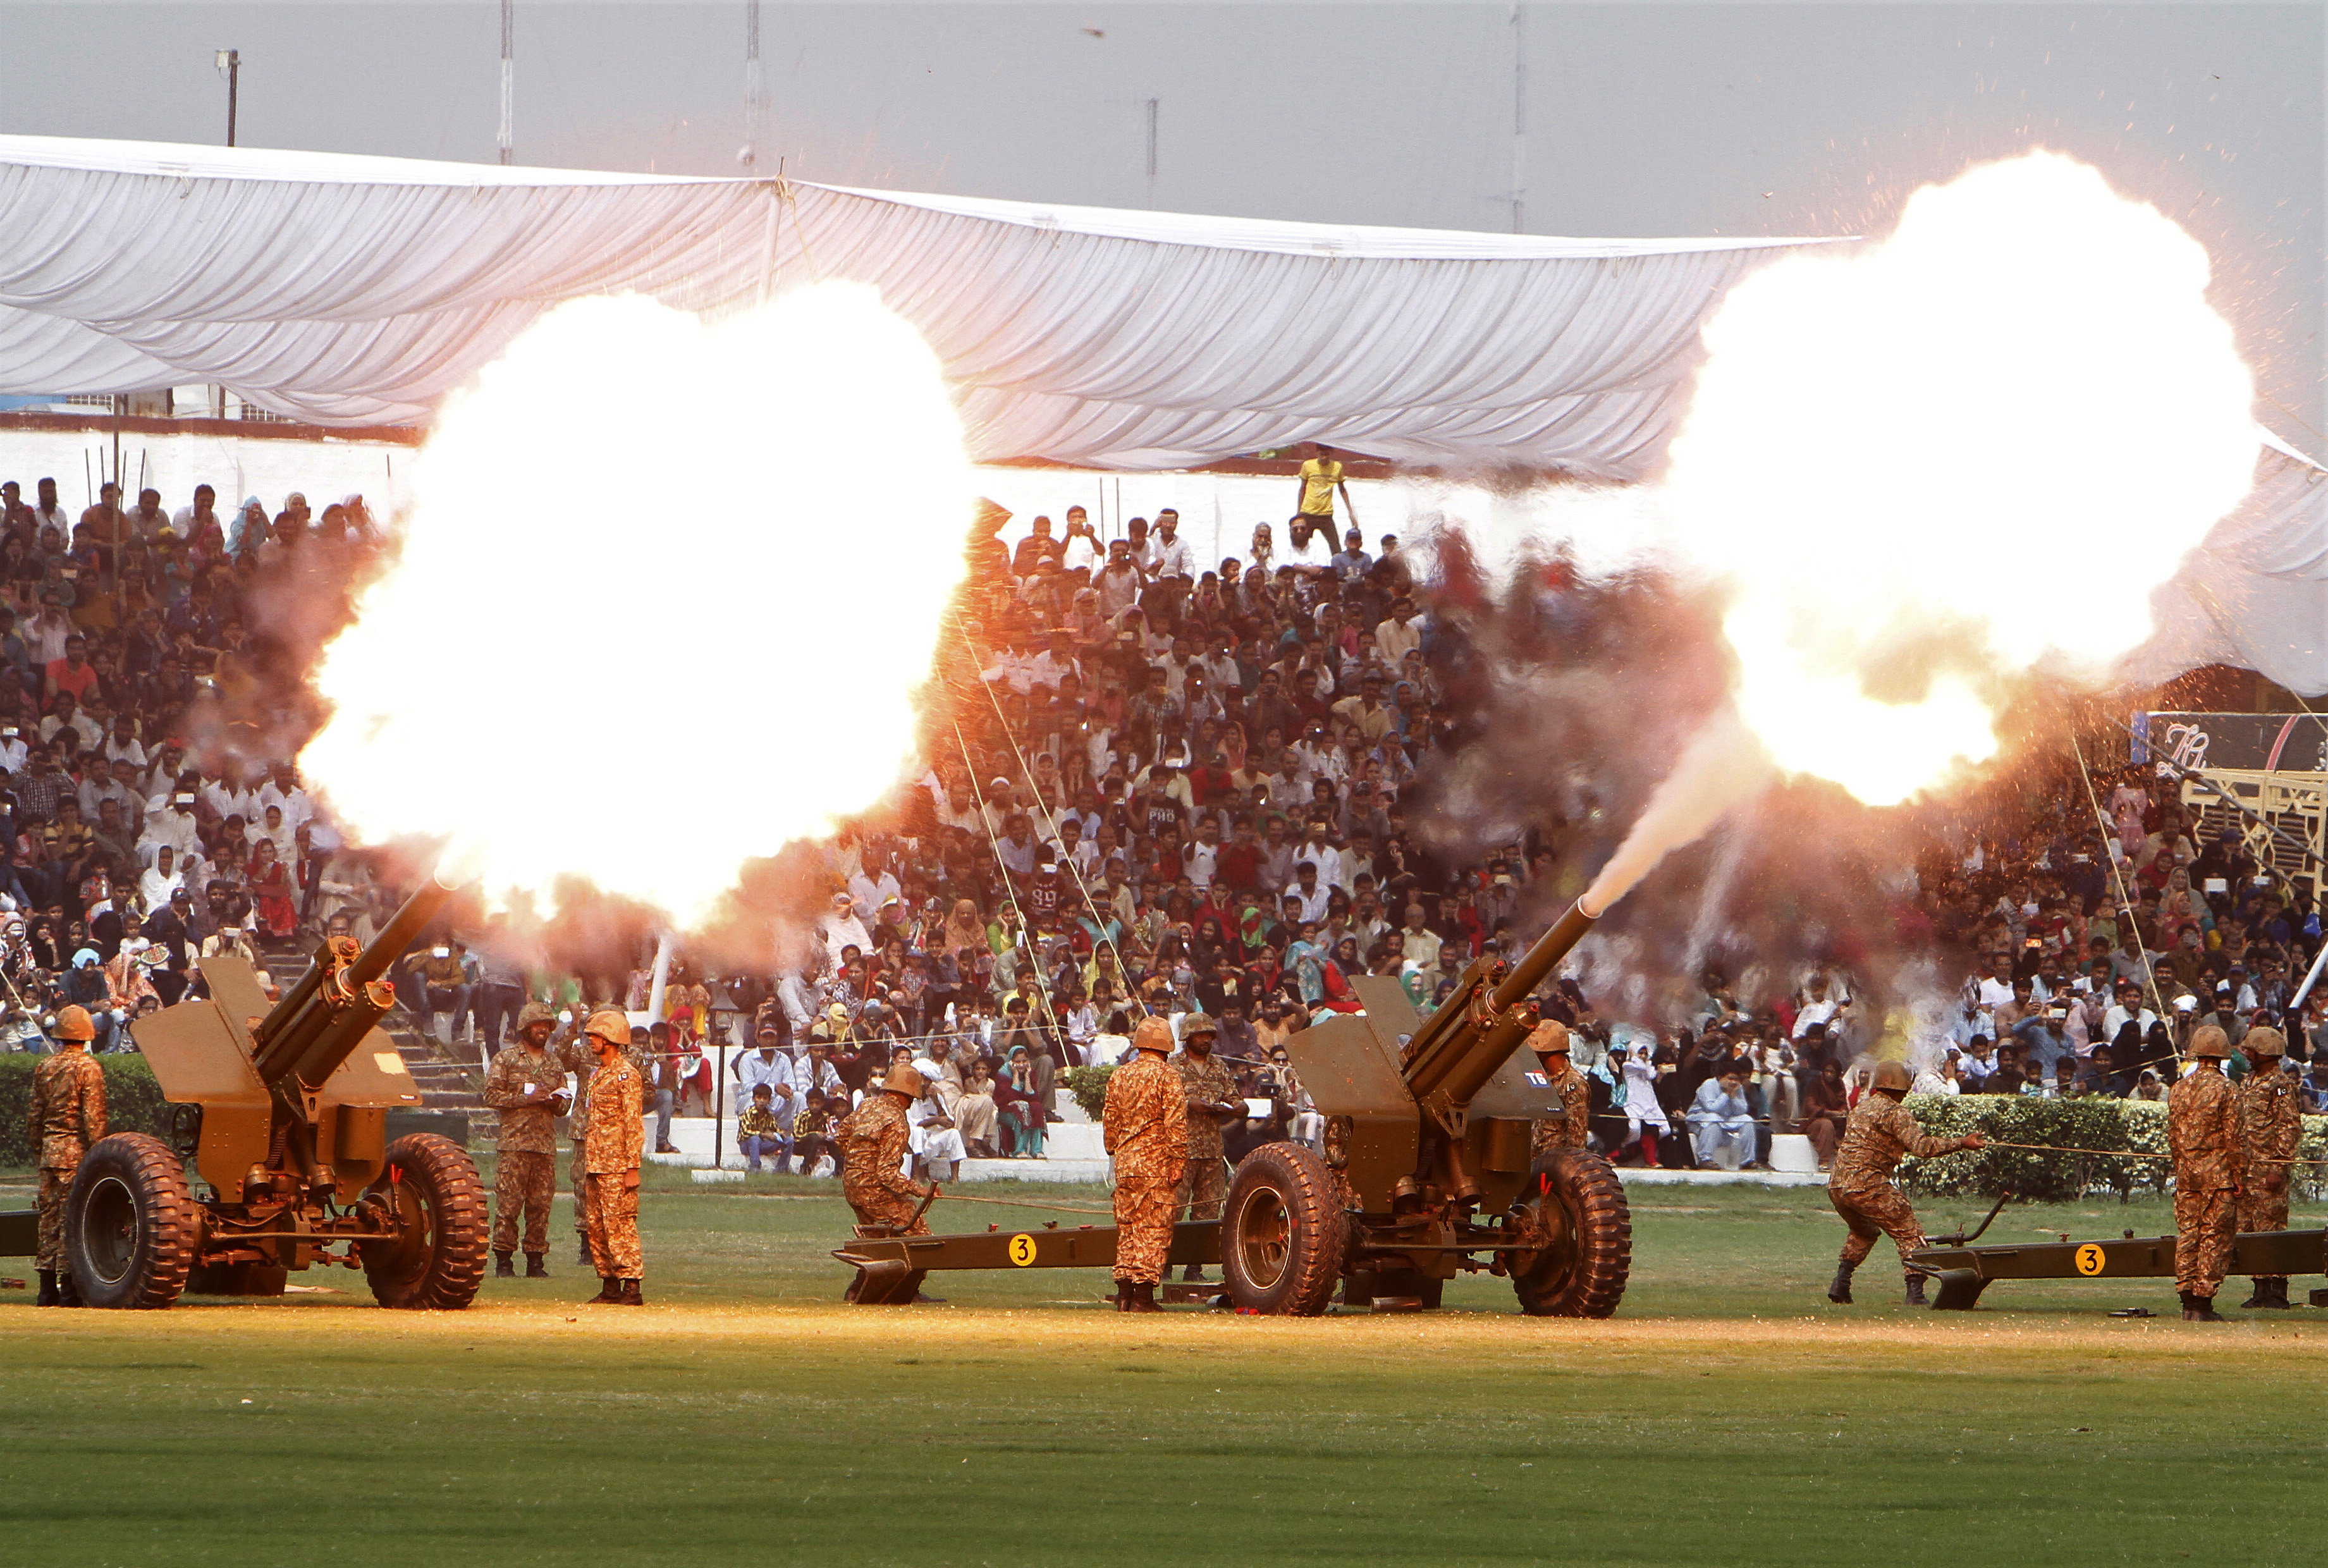 Pakistani soldiers fire canons to celebrate Pakistan Defense Day, marking the 1965 war with India over the disputed Kashmir region, in Lahore, Pakistan, Wednesday, Sept. 6, 2017. (AP Photo/K.M. Chaudary)